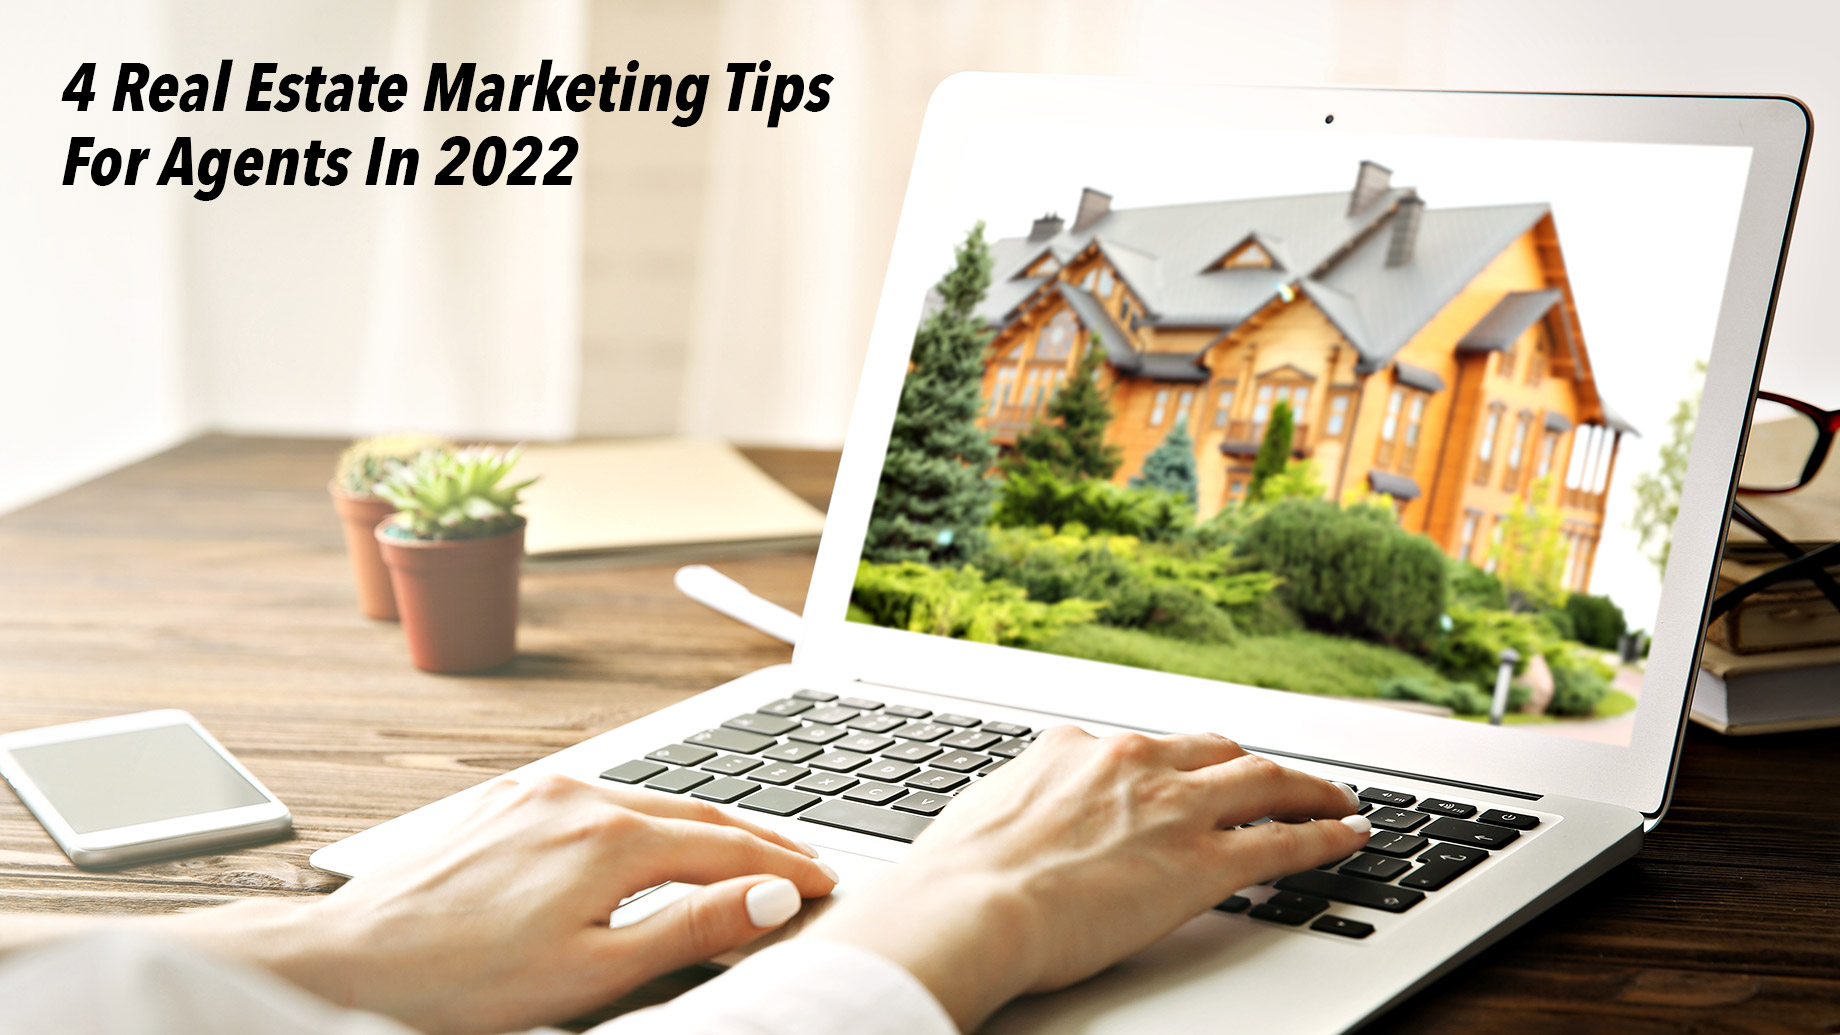 4 Real Estate Marketing Tips For Agents In 2022